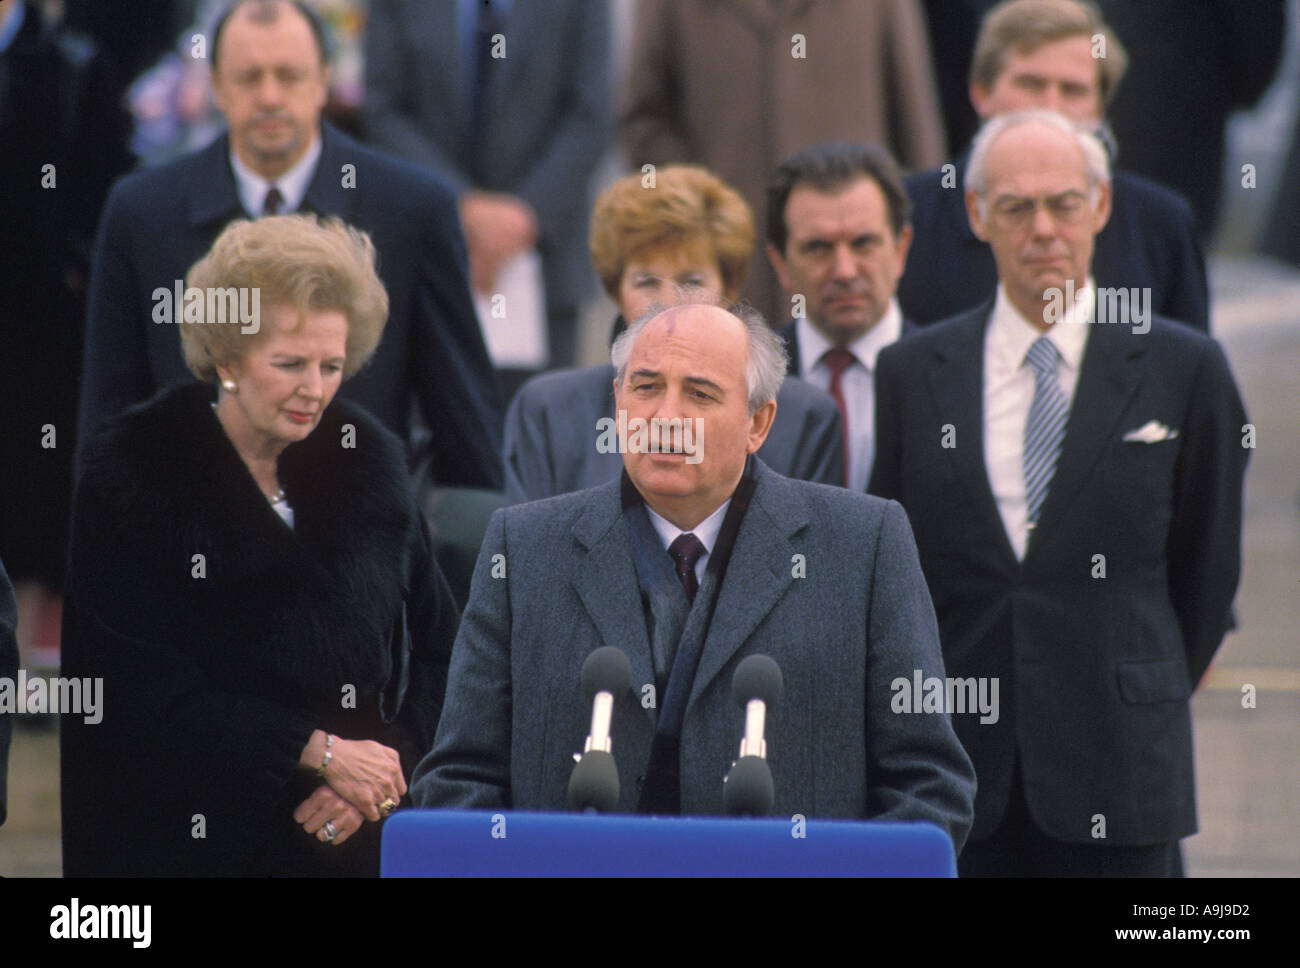 Prime minister Maggie Thatcher with Russian President Gorbachev at press conference outside 10 Downing St London 1989 Stock Photo